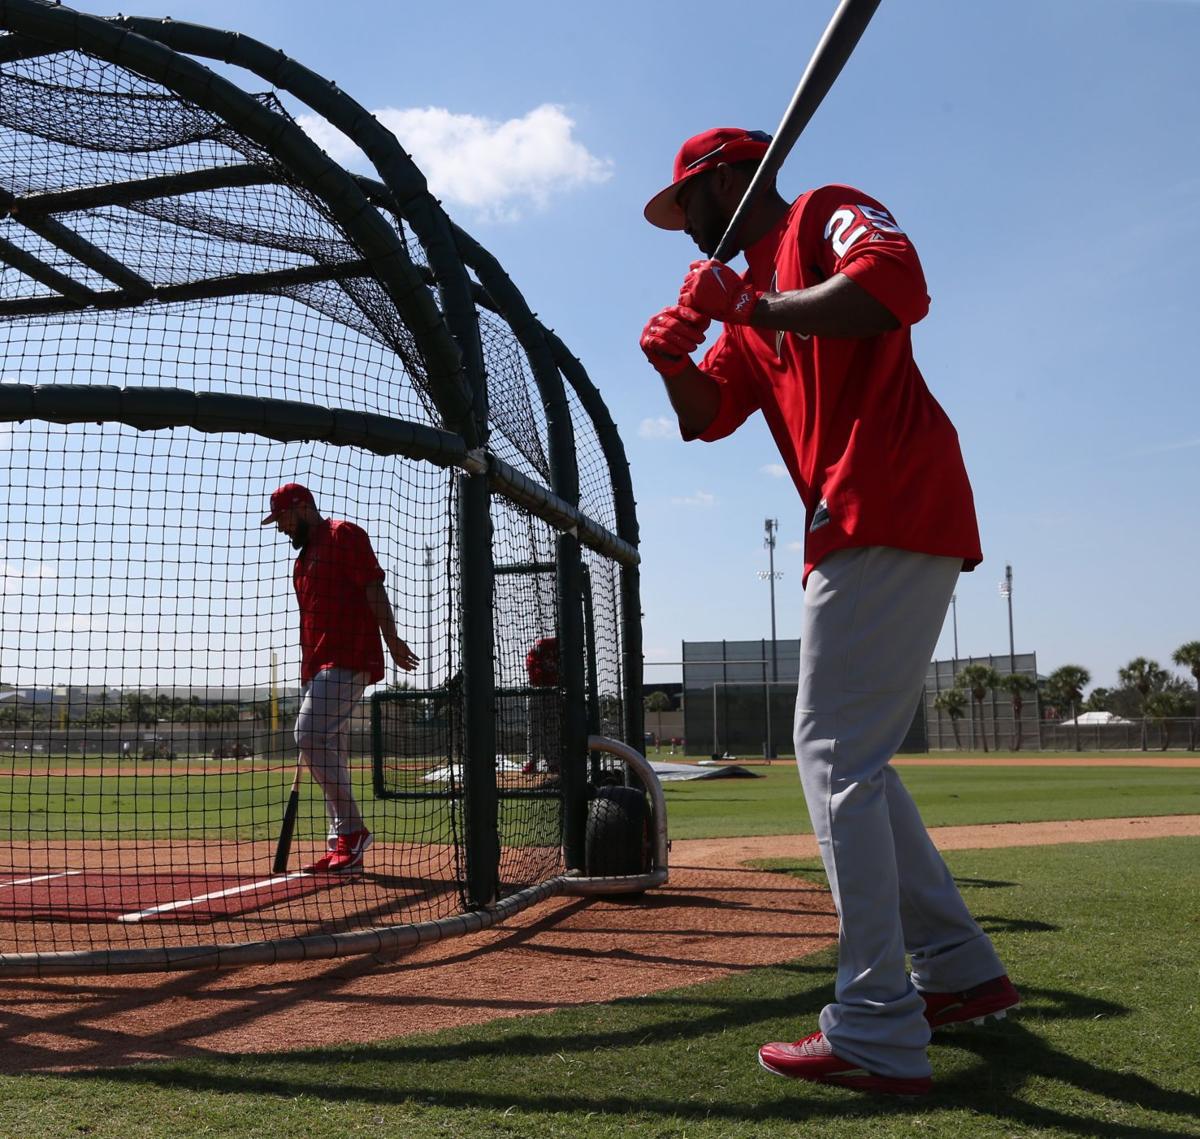 Full Squad Workouts begin at Cardinals Spring Training | St. Louis Cardinals | 0